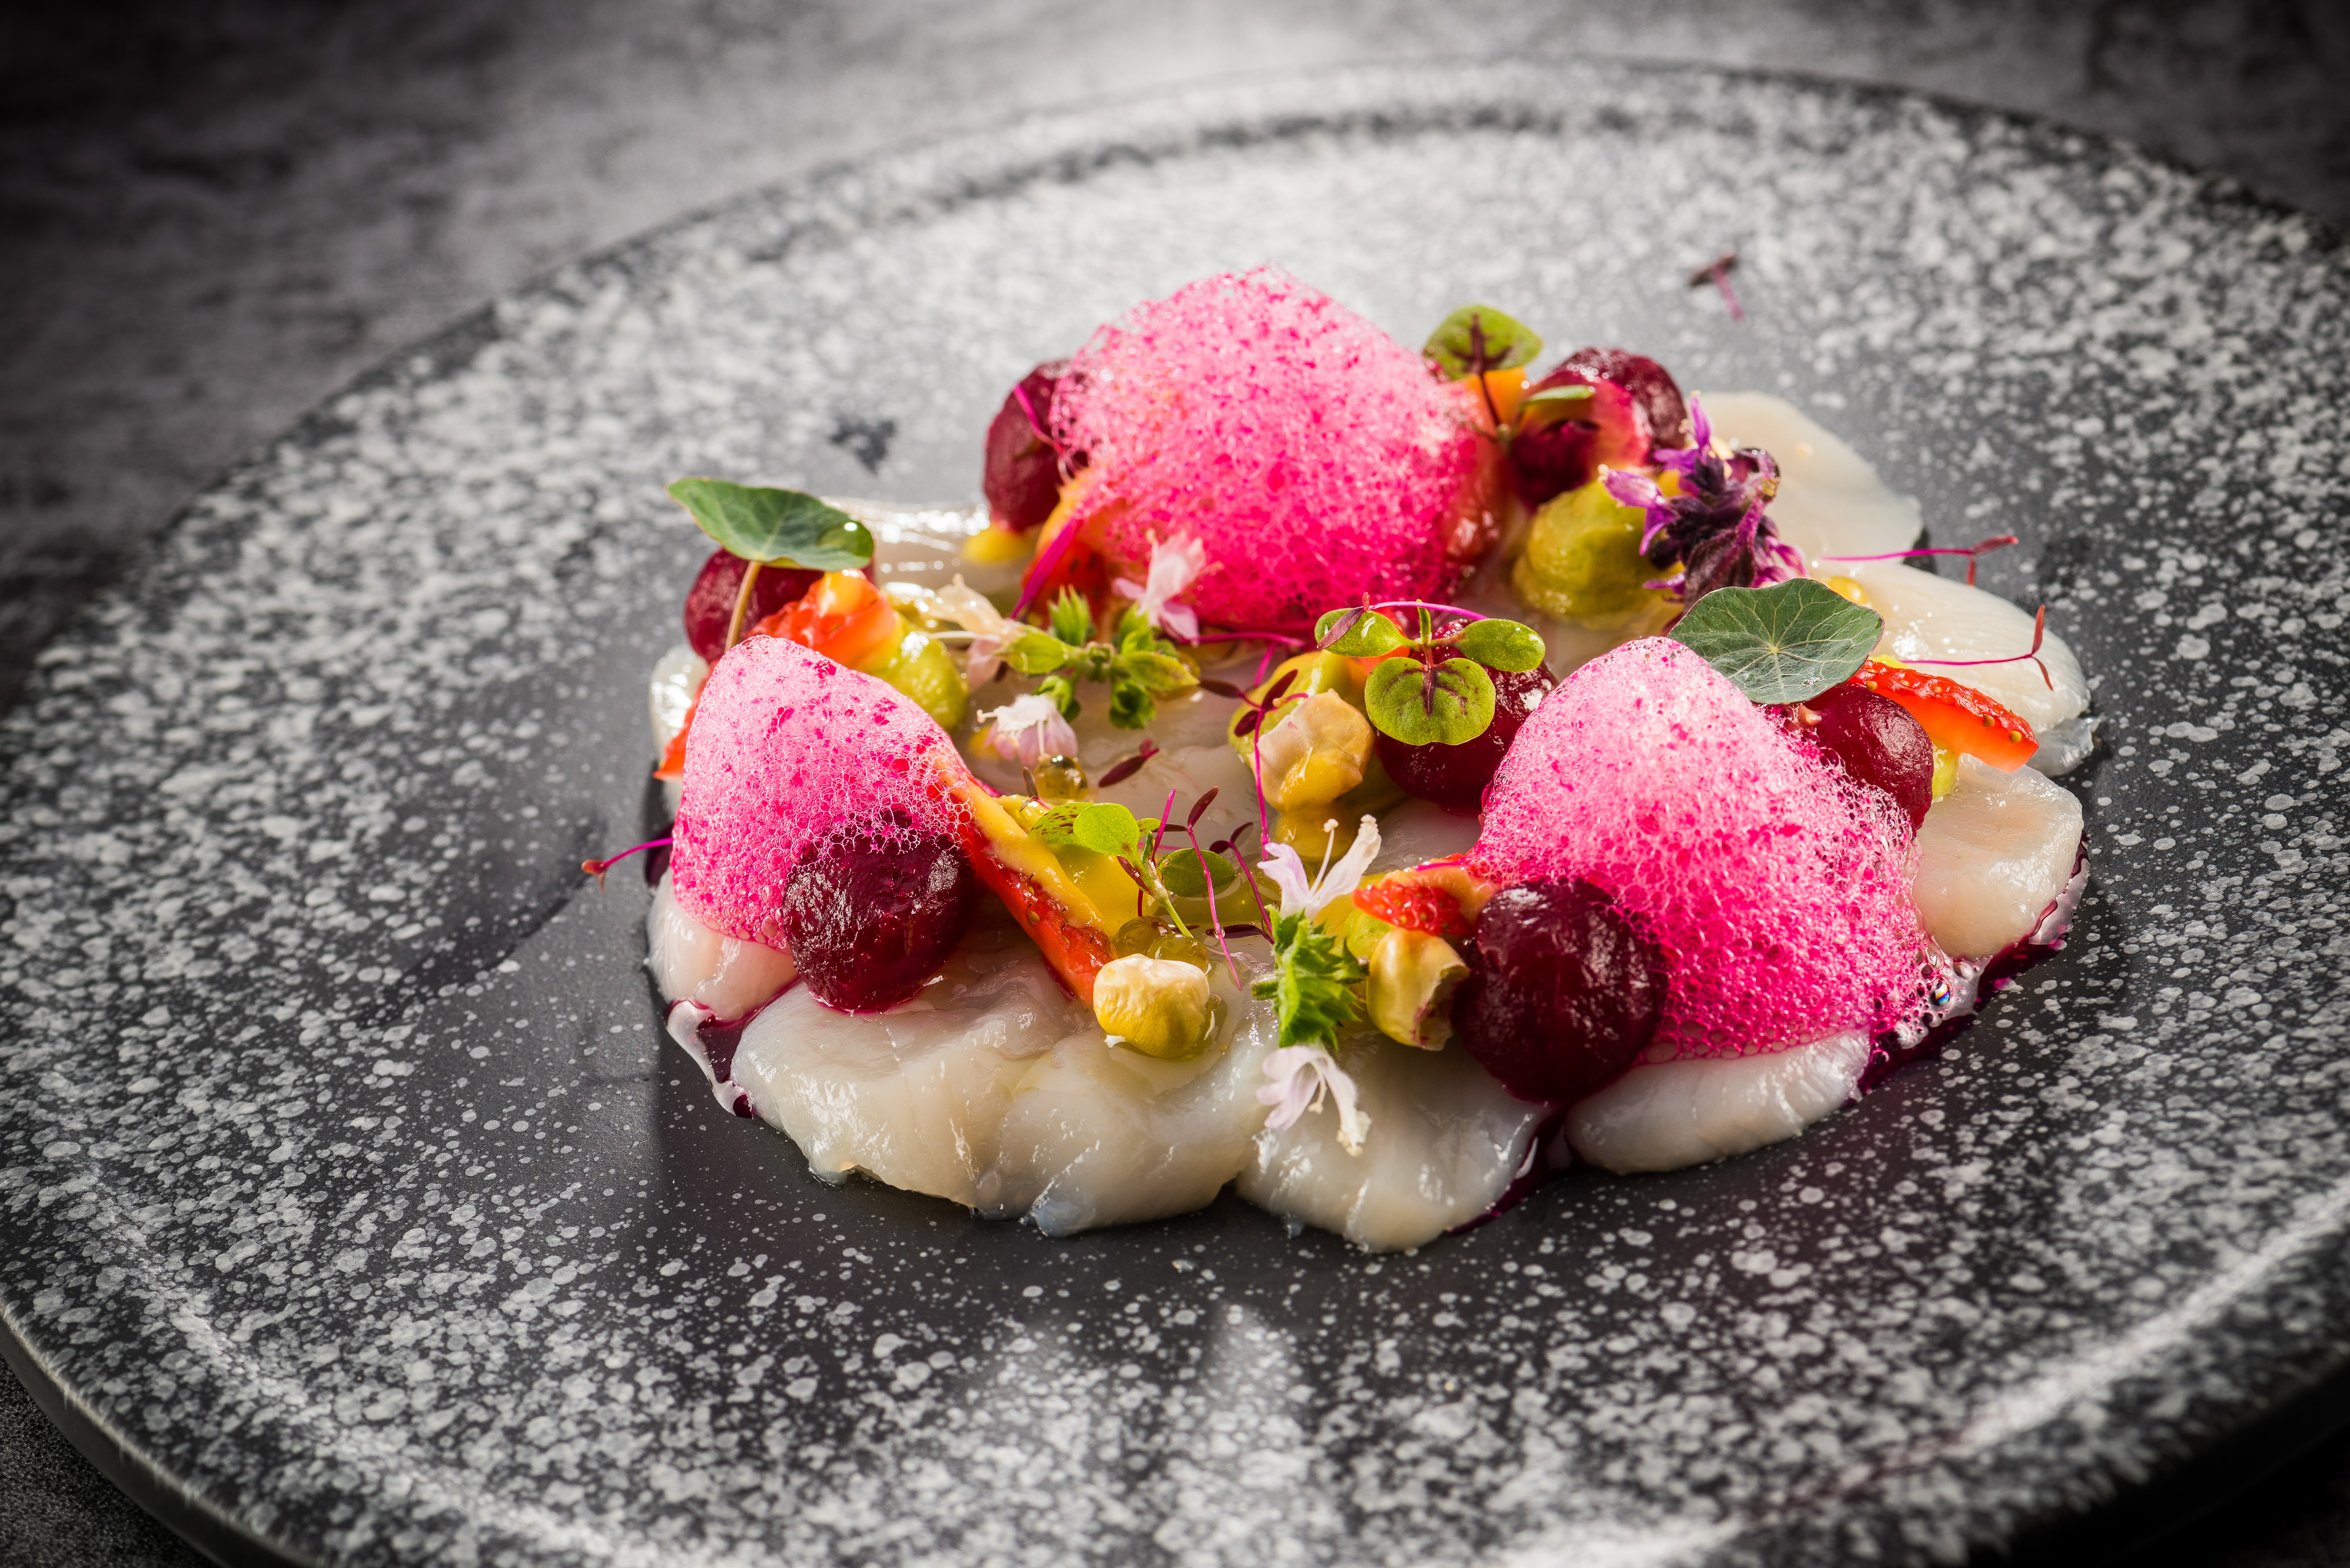 Scallop Ceviche with Beetroot, Corn, Avocado, & Strawberries from Barcelona Restaurant Taipa Village